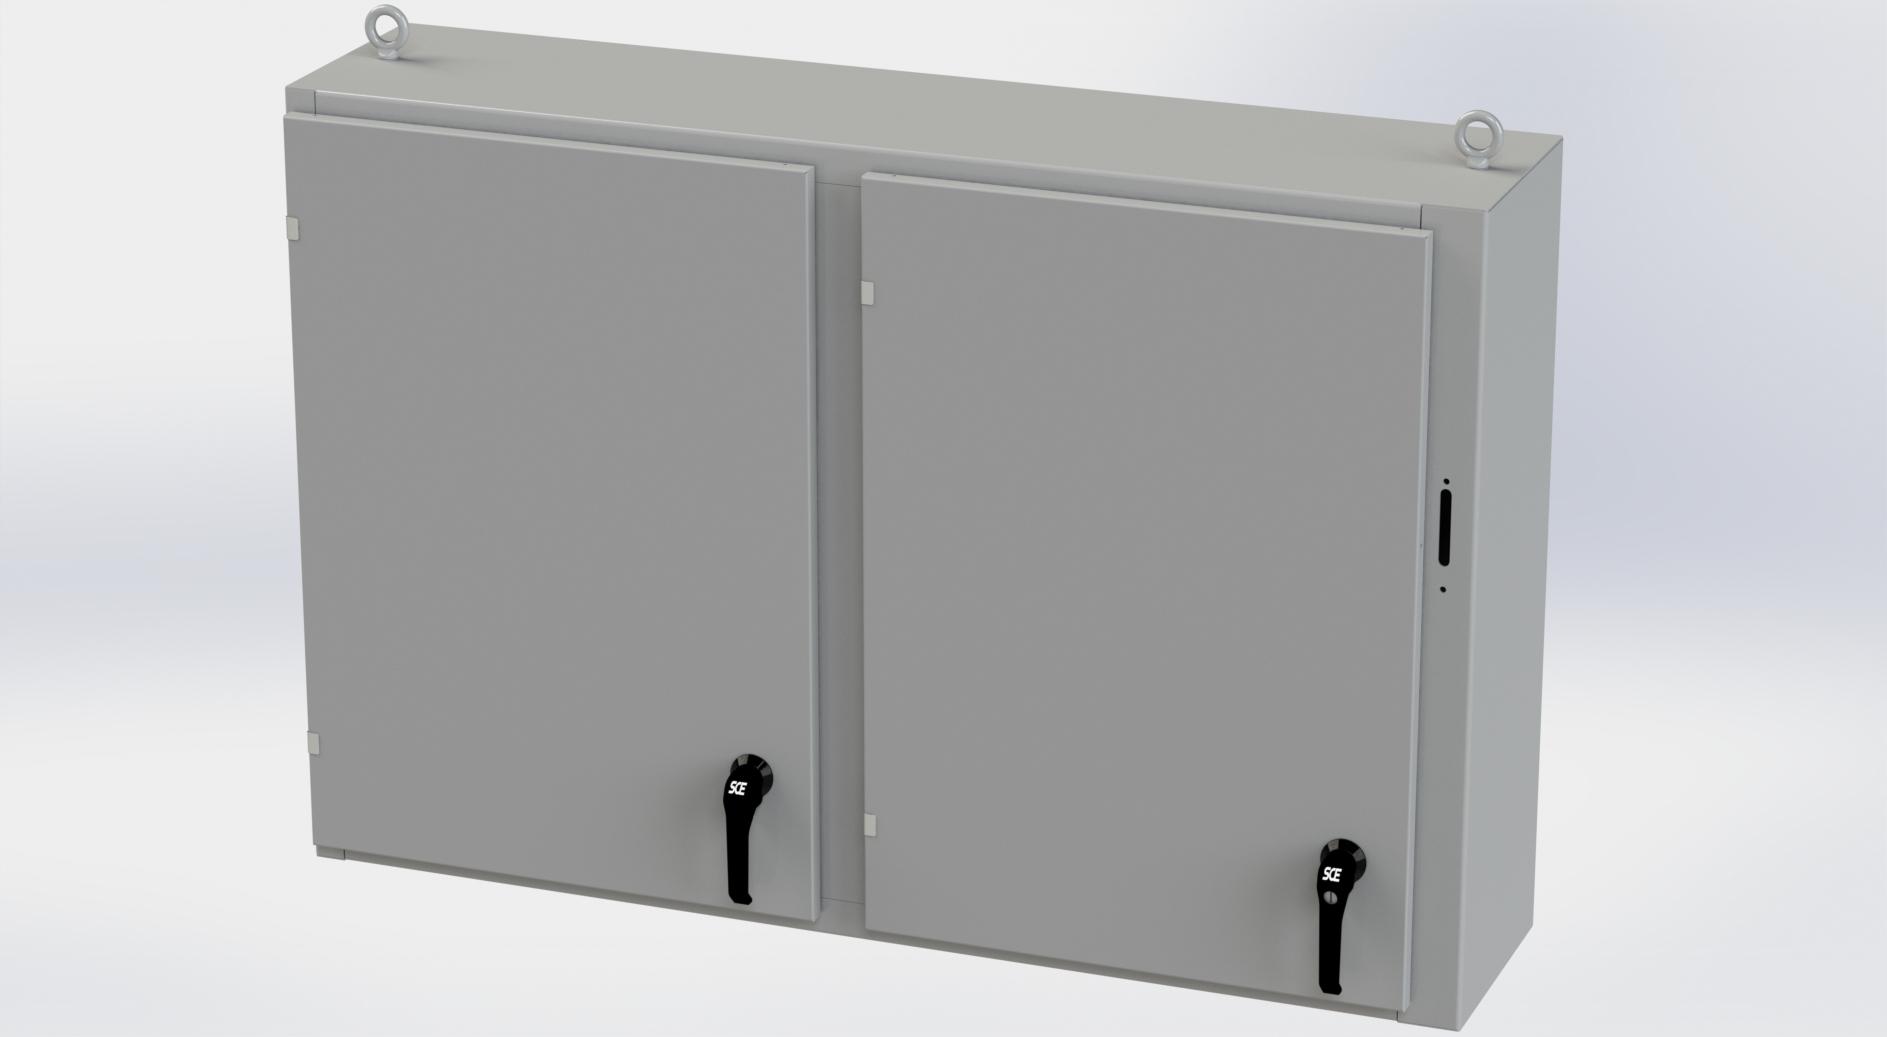 Saginaw Control SCE-36X2D5412 2DR Disc. Enclosure, Height:36.00", Width:53.75", Depth:12.00", ANSI-61 gray powder coating inside and out. Optional sub-panels are powder coated white.